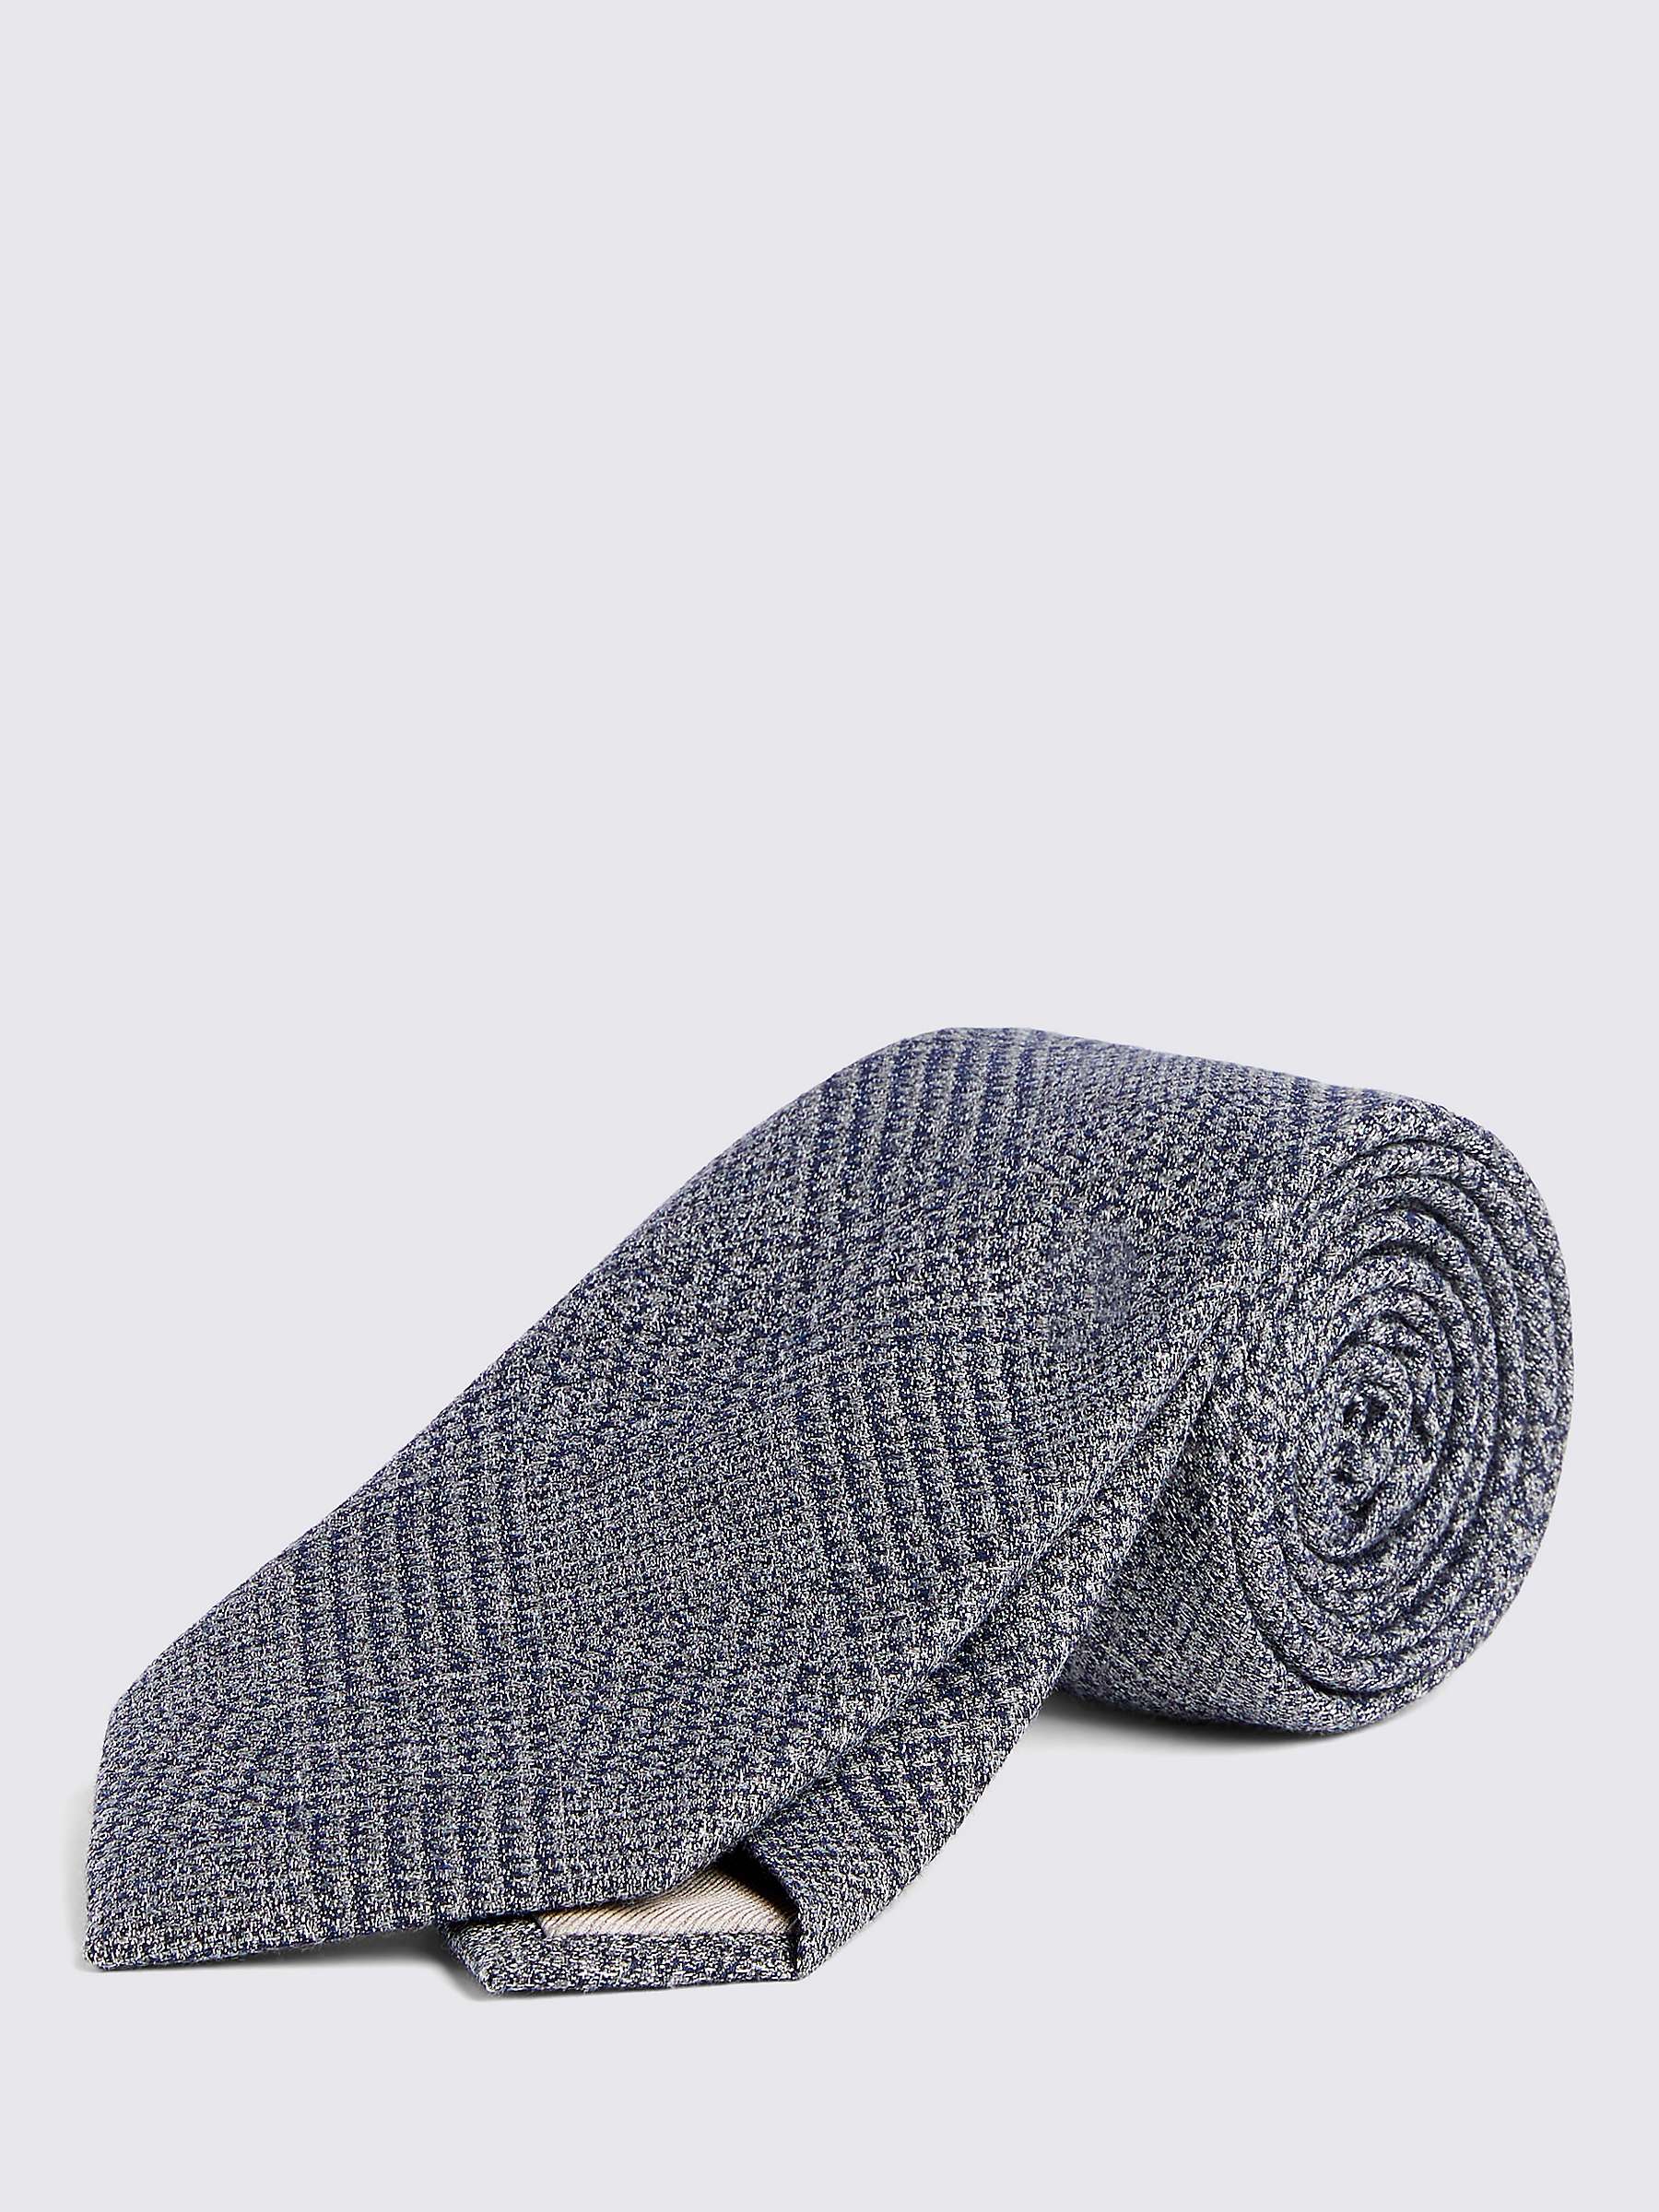 Buy Moss Silk Blend Textured Prince Of Wales Check Tie, Navy Online at johnlewis.com